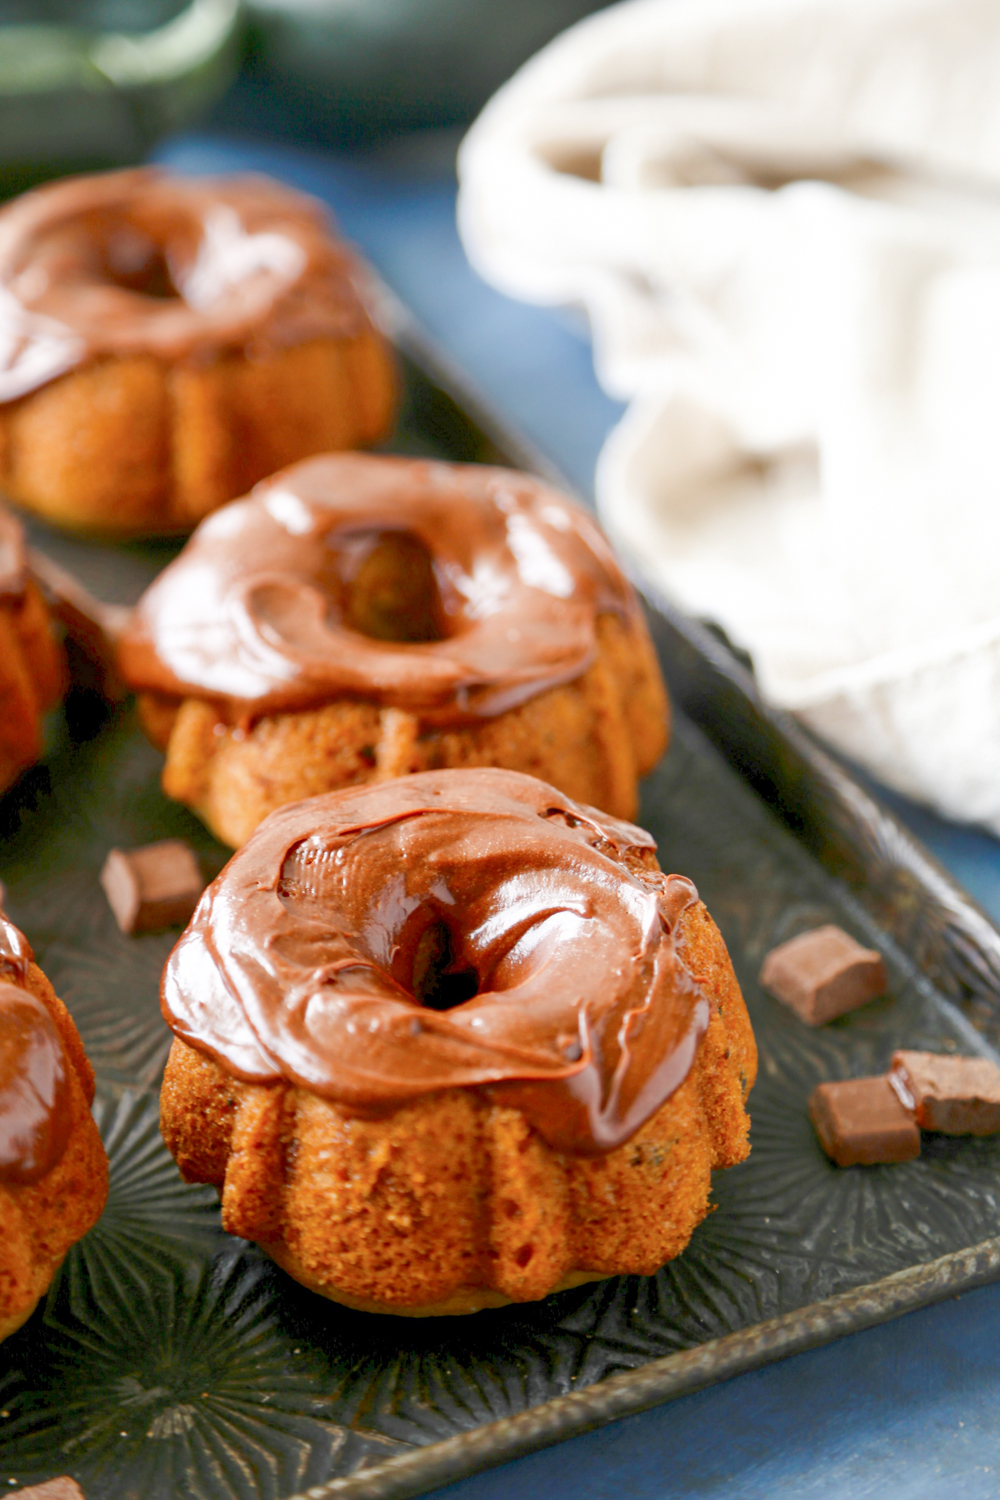 These Mini Spice Zucchini Bundt Cakes are a delicious way to celebrate the fall season!  Top with a delicious chocolate frosting and these little cakes can't be beat!